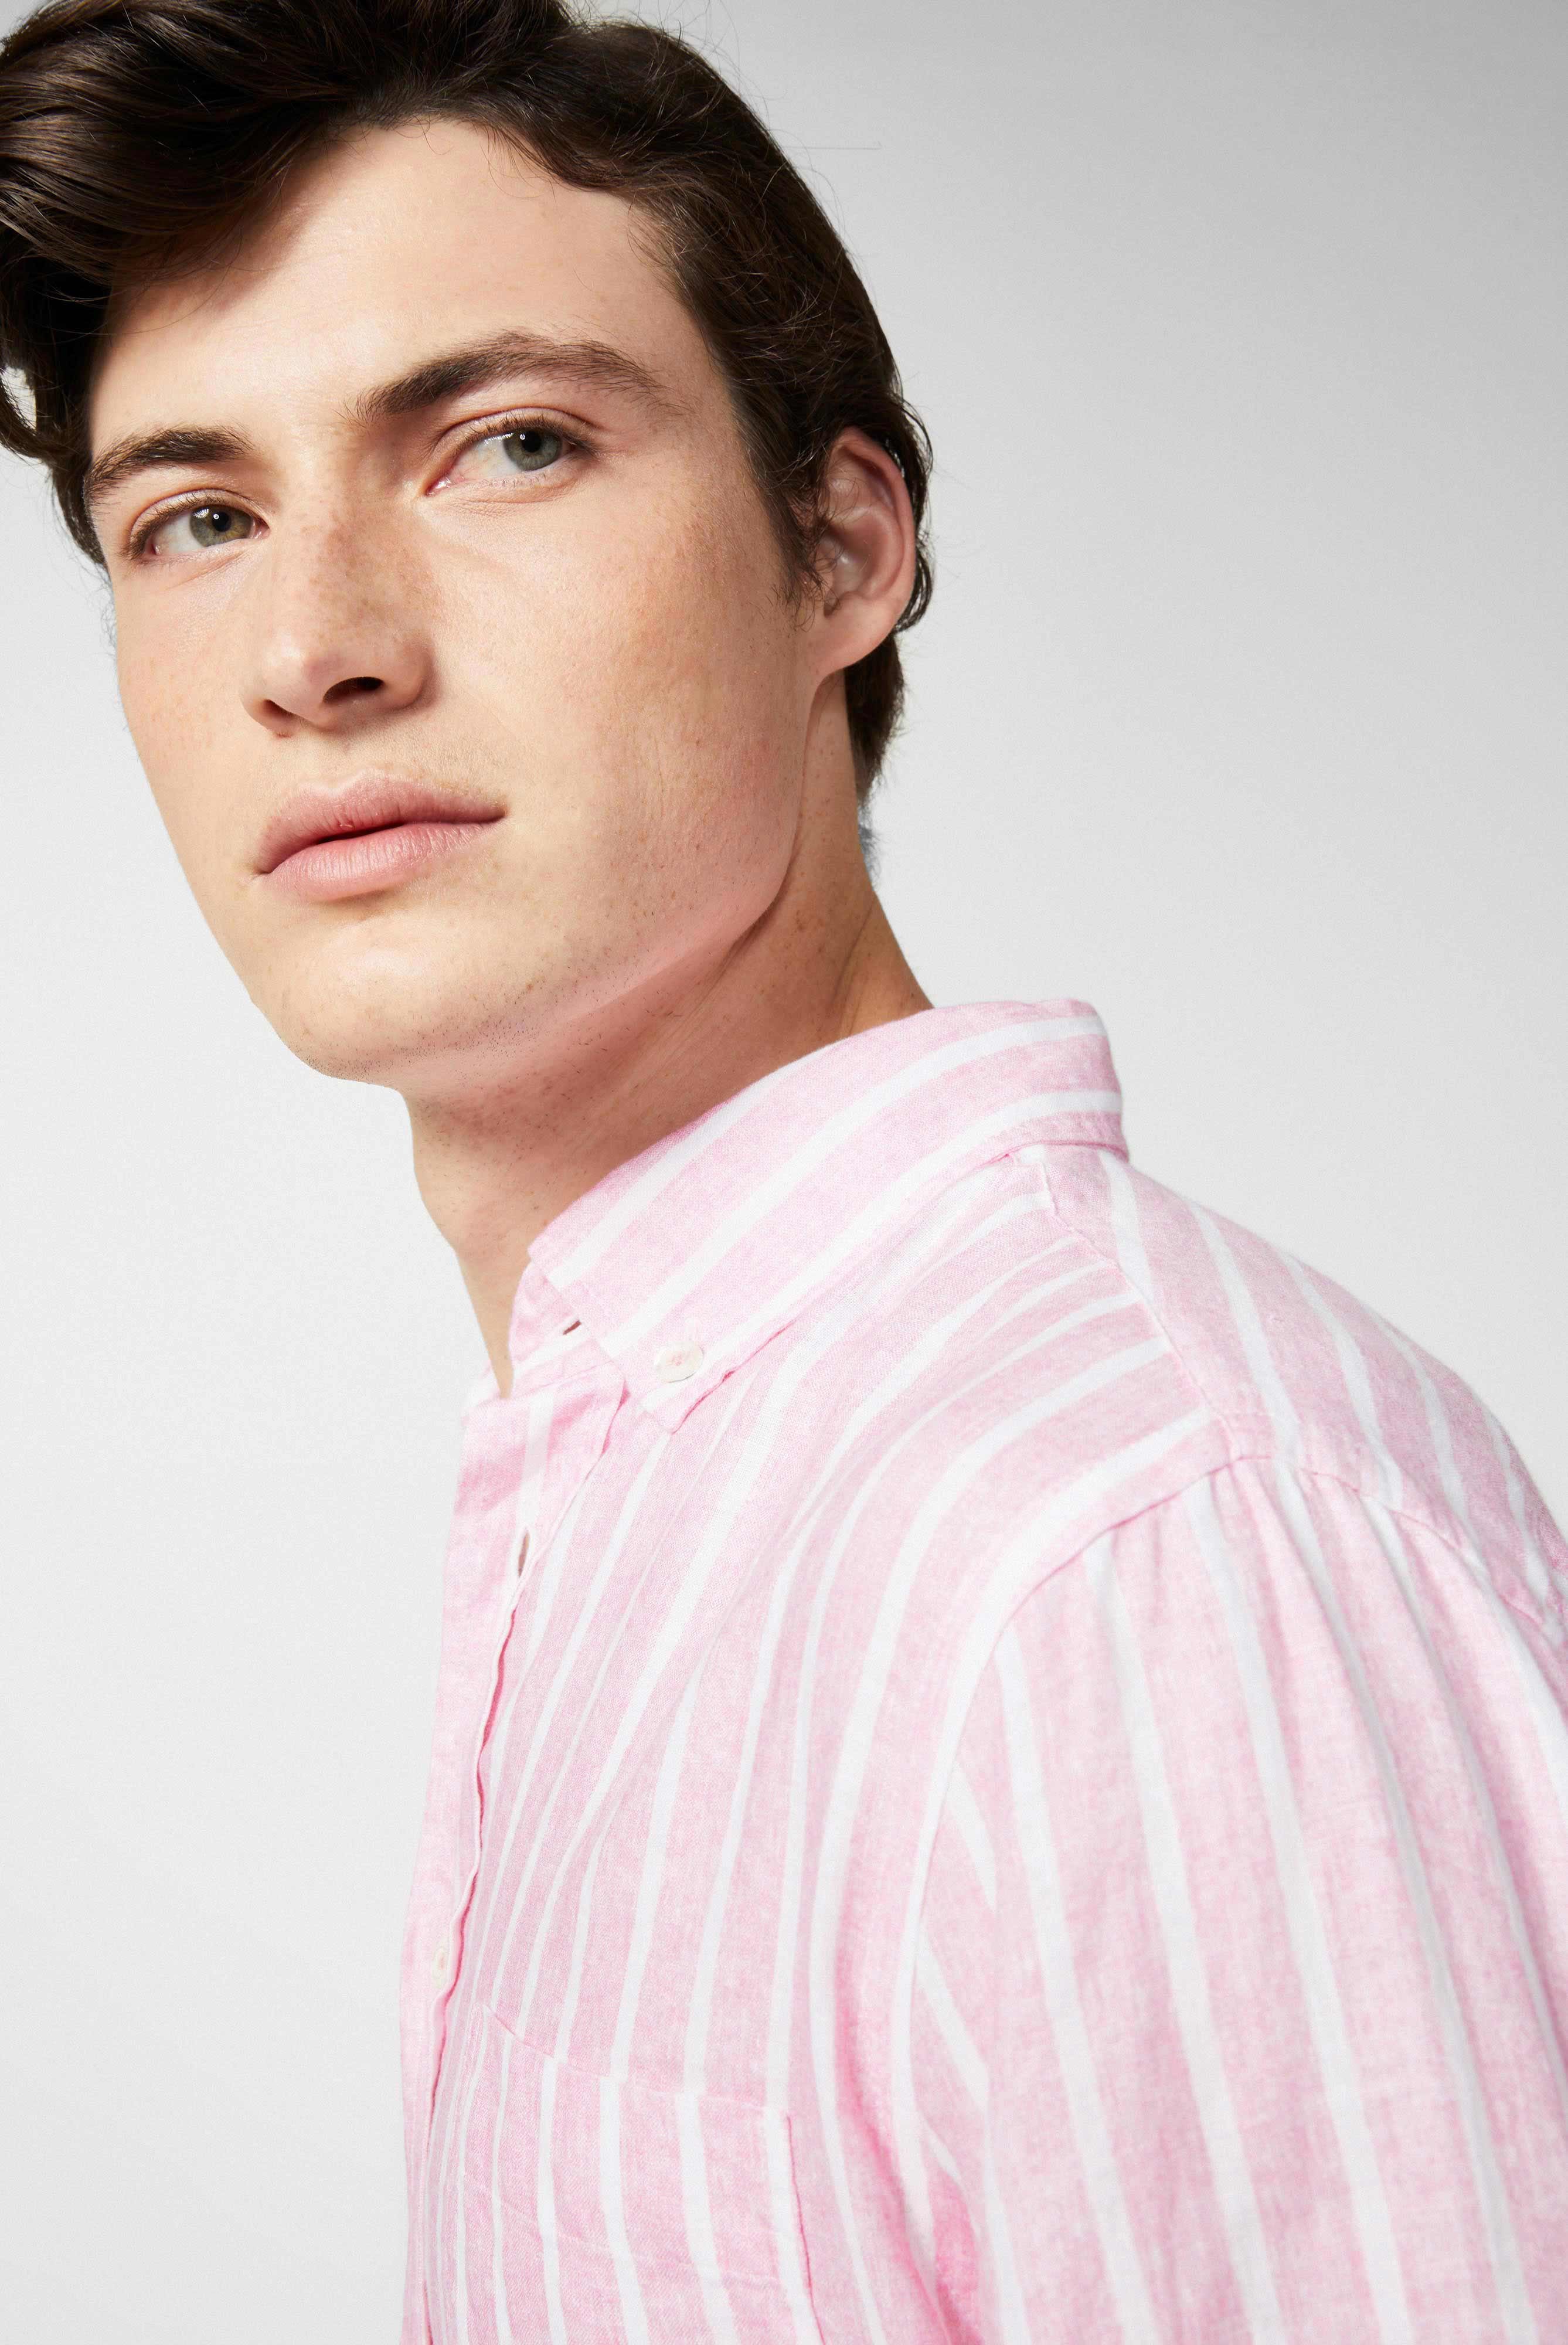 Casual Shirts+Linen button-down hem with stripe printred+20.2013.MB.170238.530.40